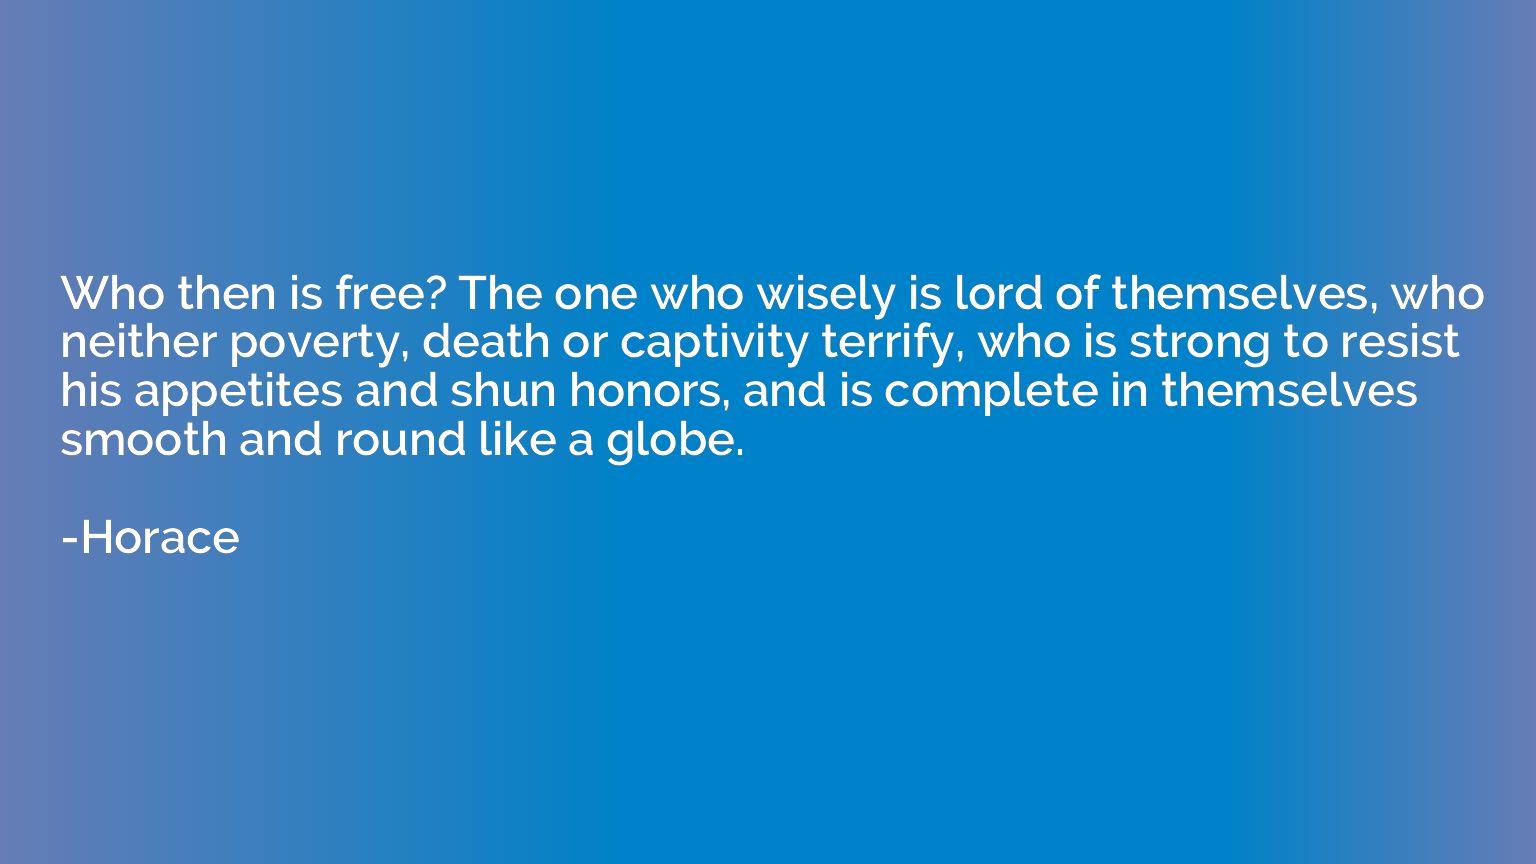 Who then is free? The one who wisely is lord of themselves, 